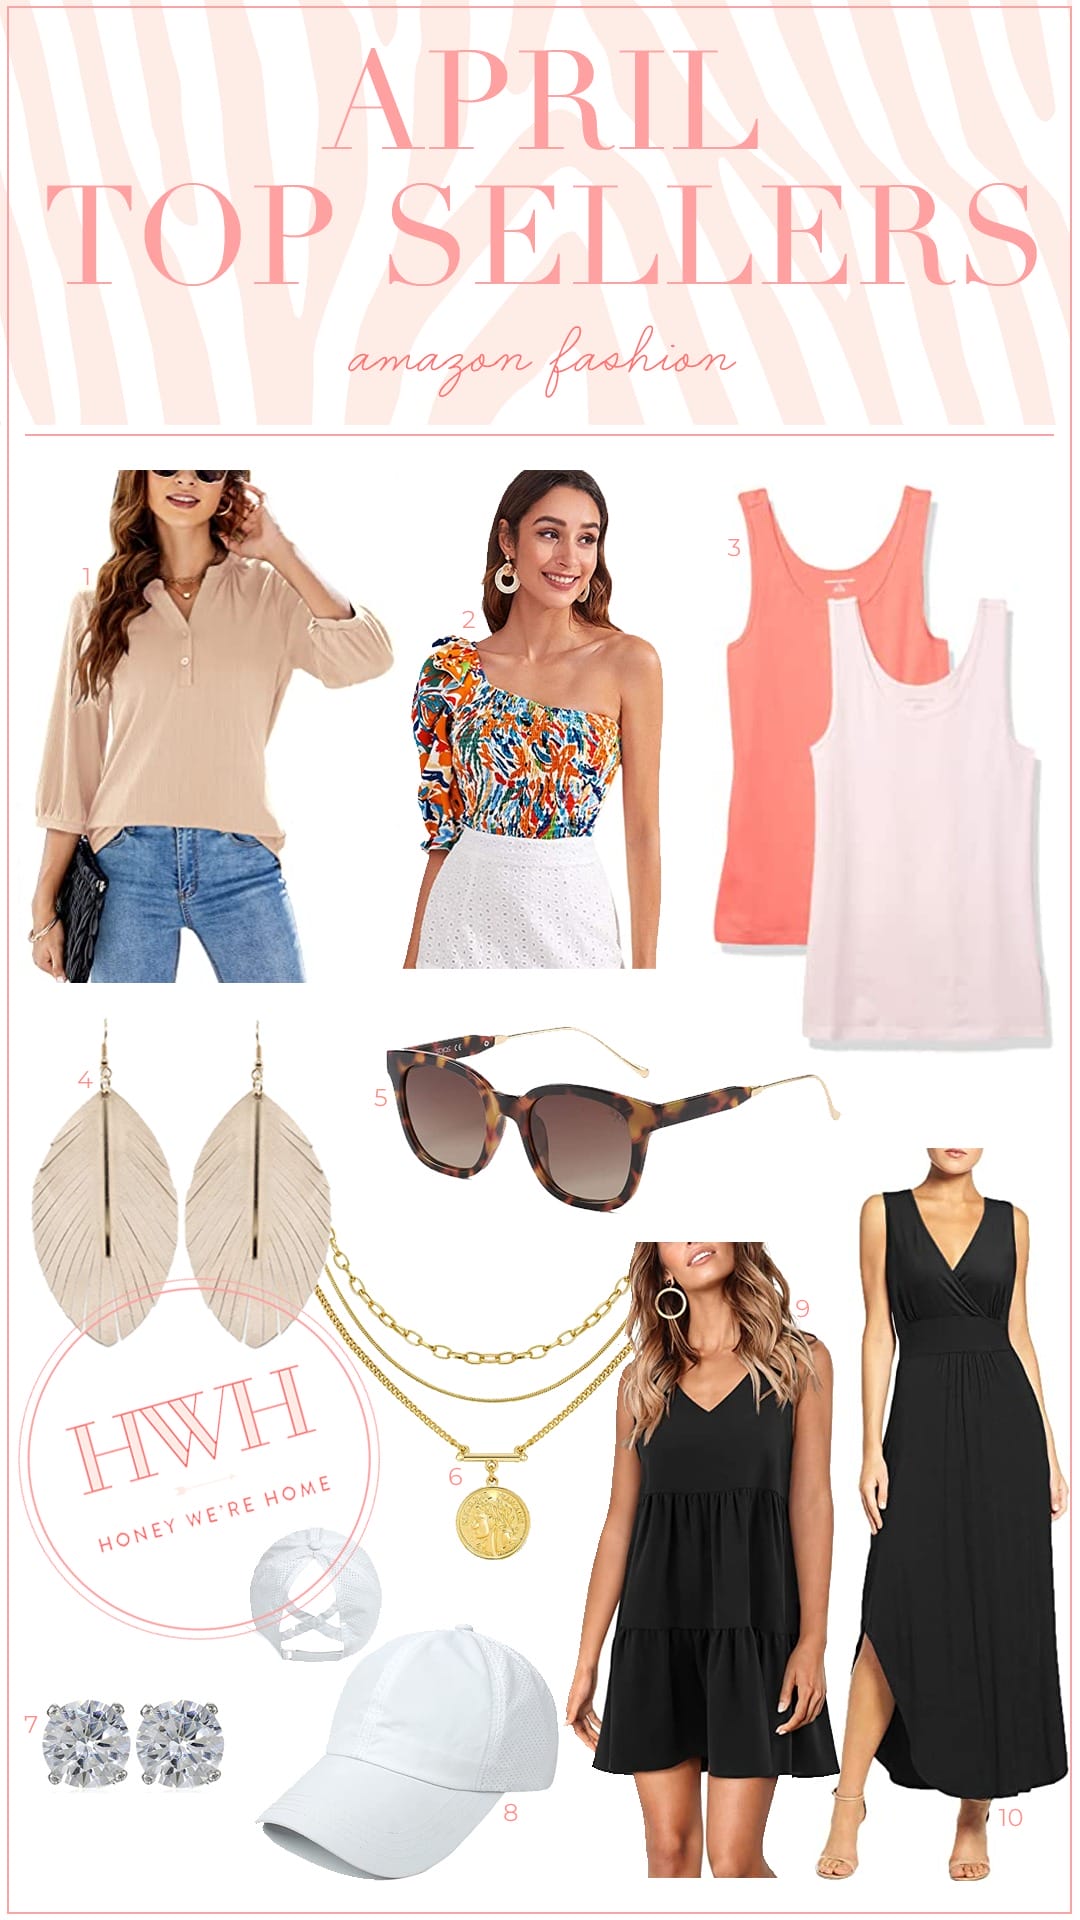 April Top Sellers Fashion